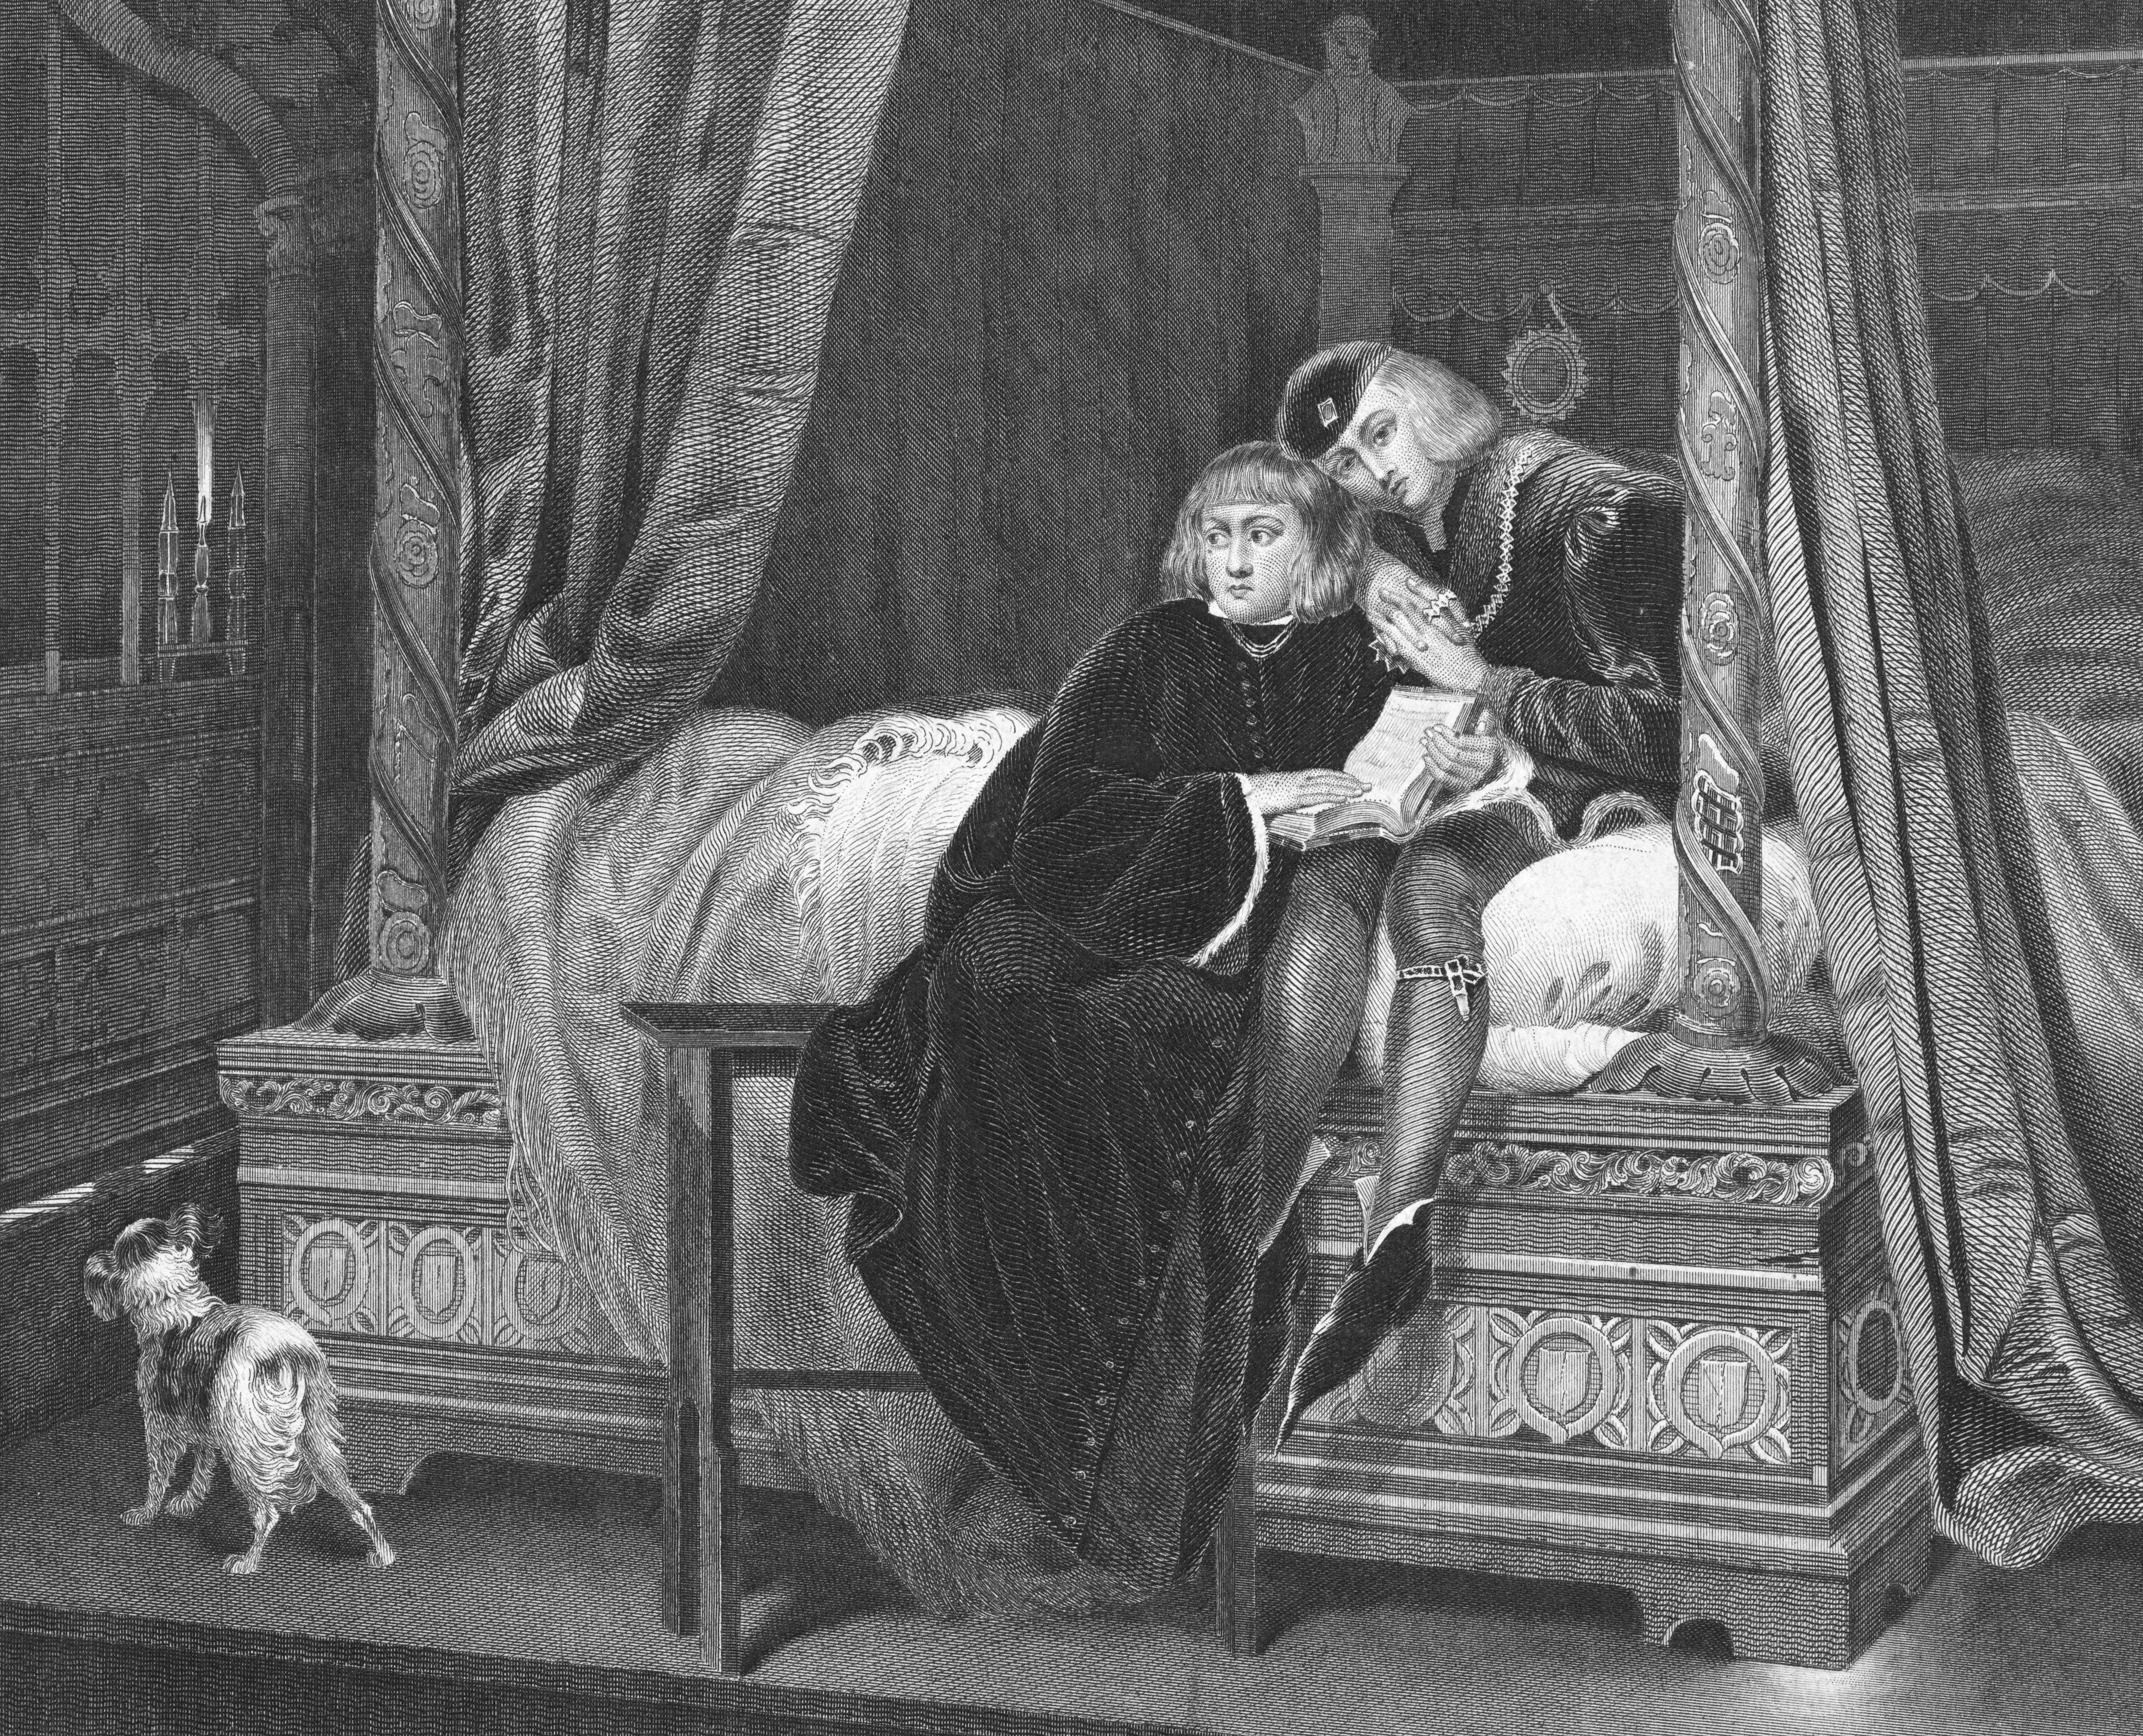 A drawing of Edward V and his brother Richard sitting on a bed